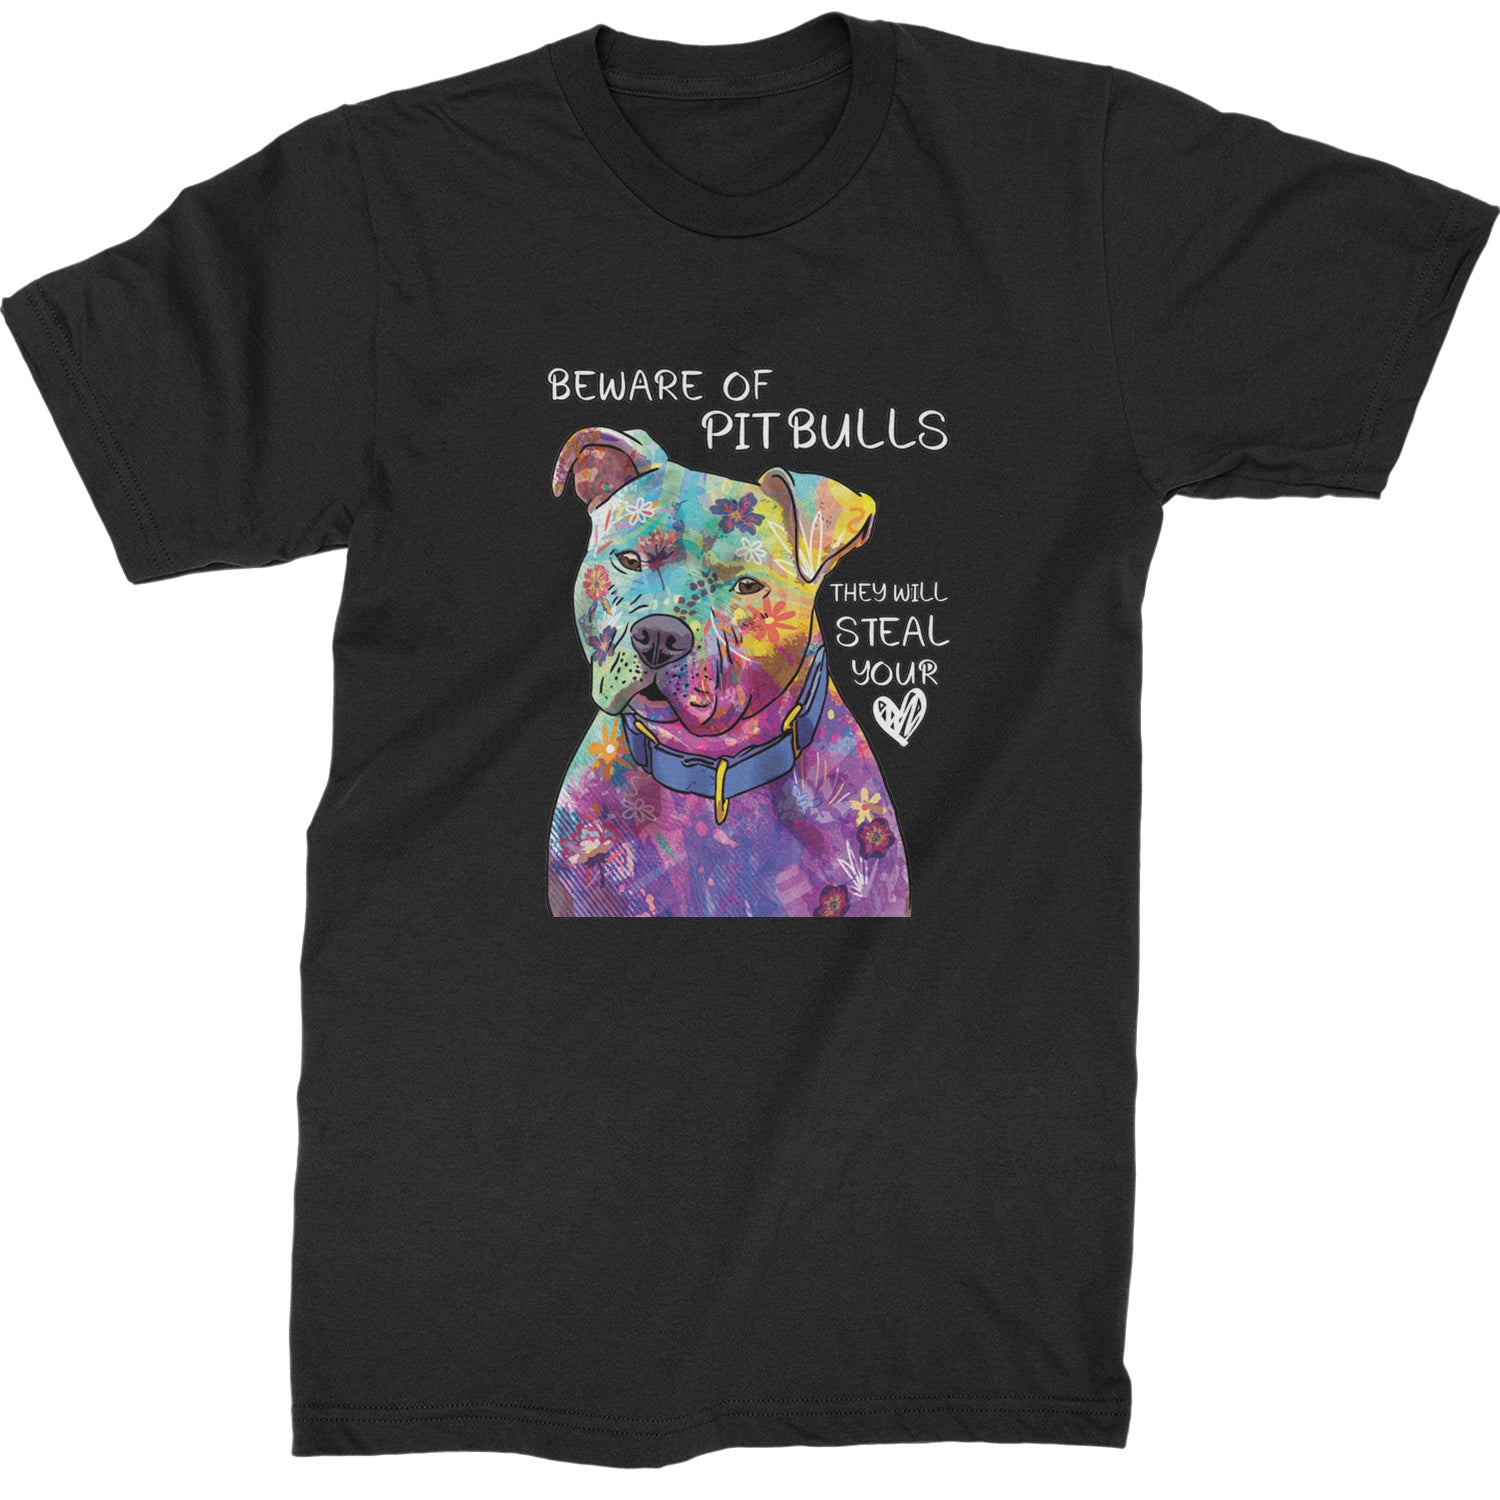 Beware Of Pit Bulls, They Will Steal Your Heart  Mens T-shirt